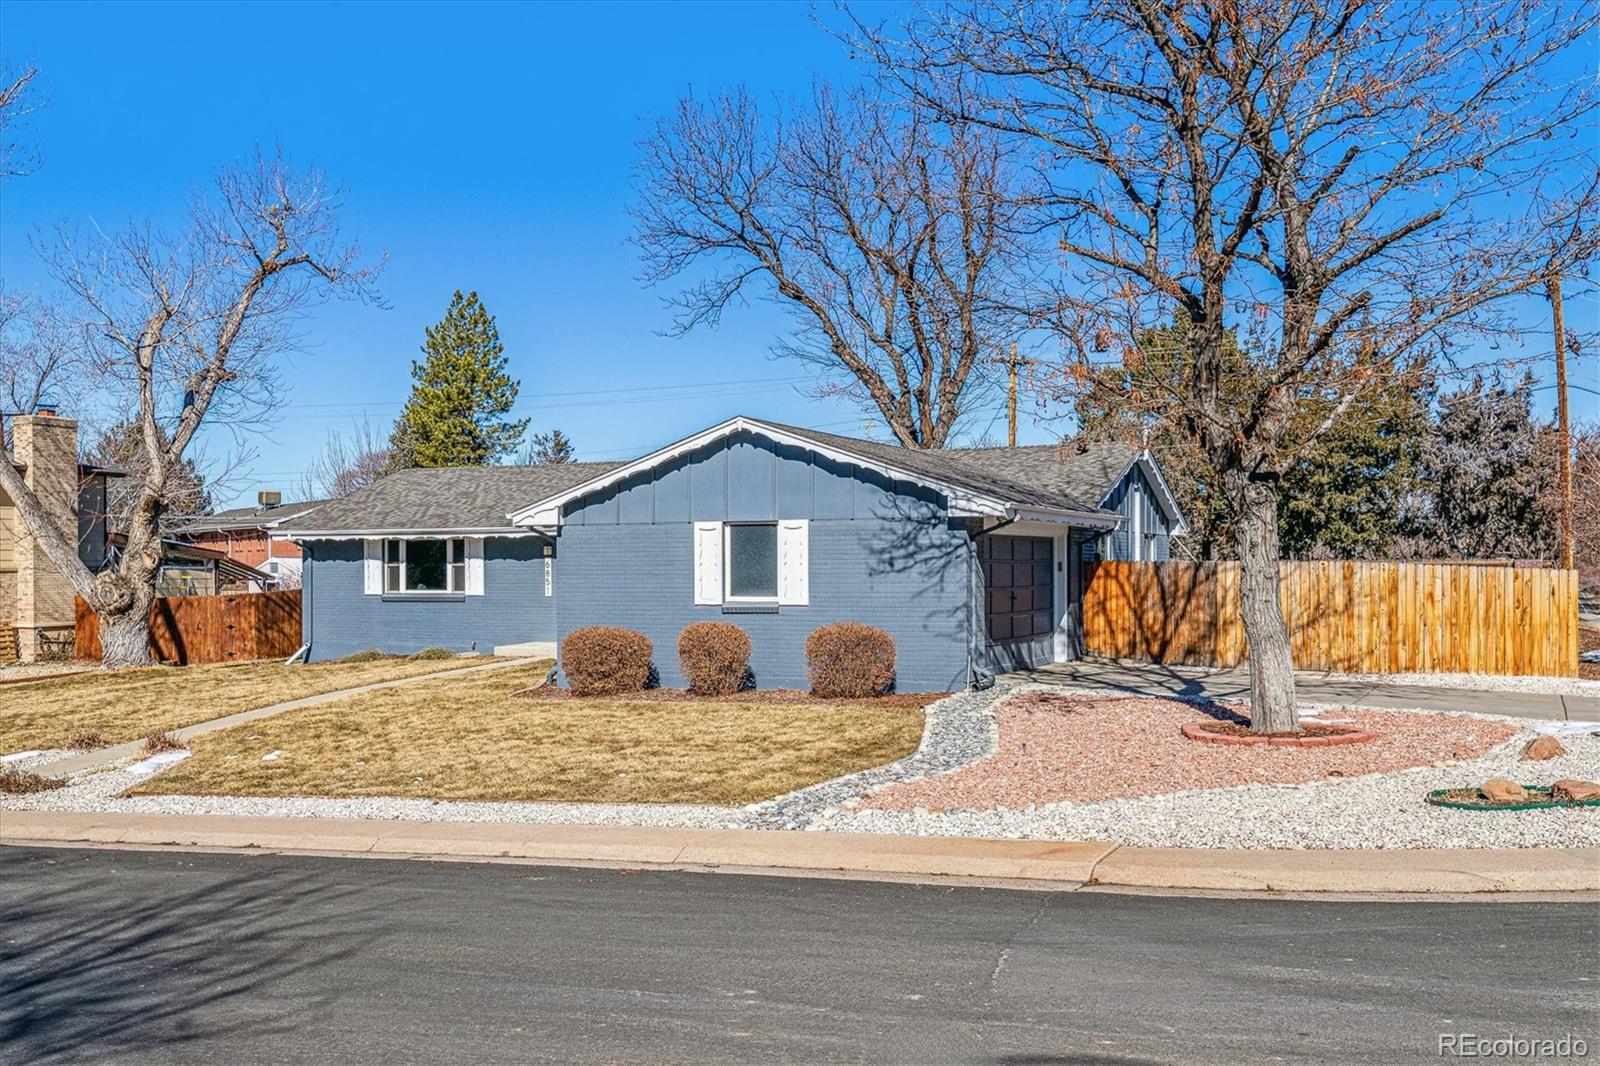 Report Image for 6851 S Prince Circle,Littleton, Colorado